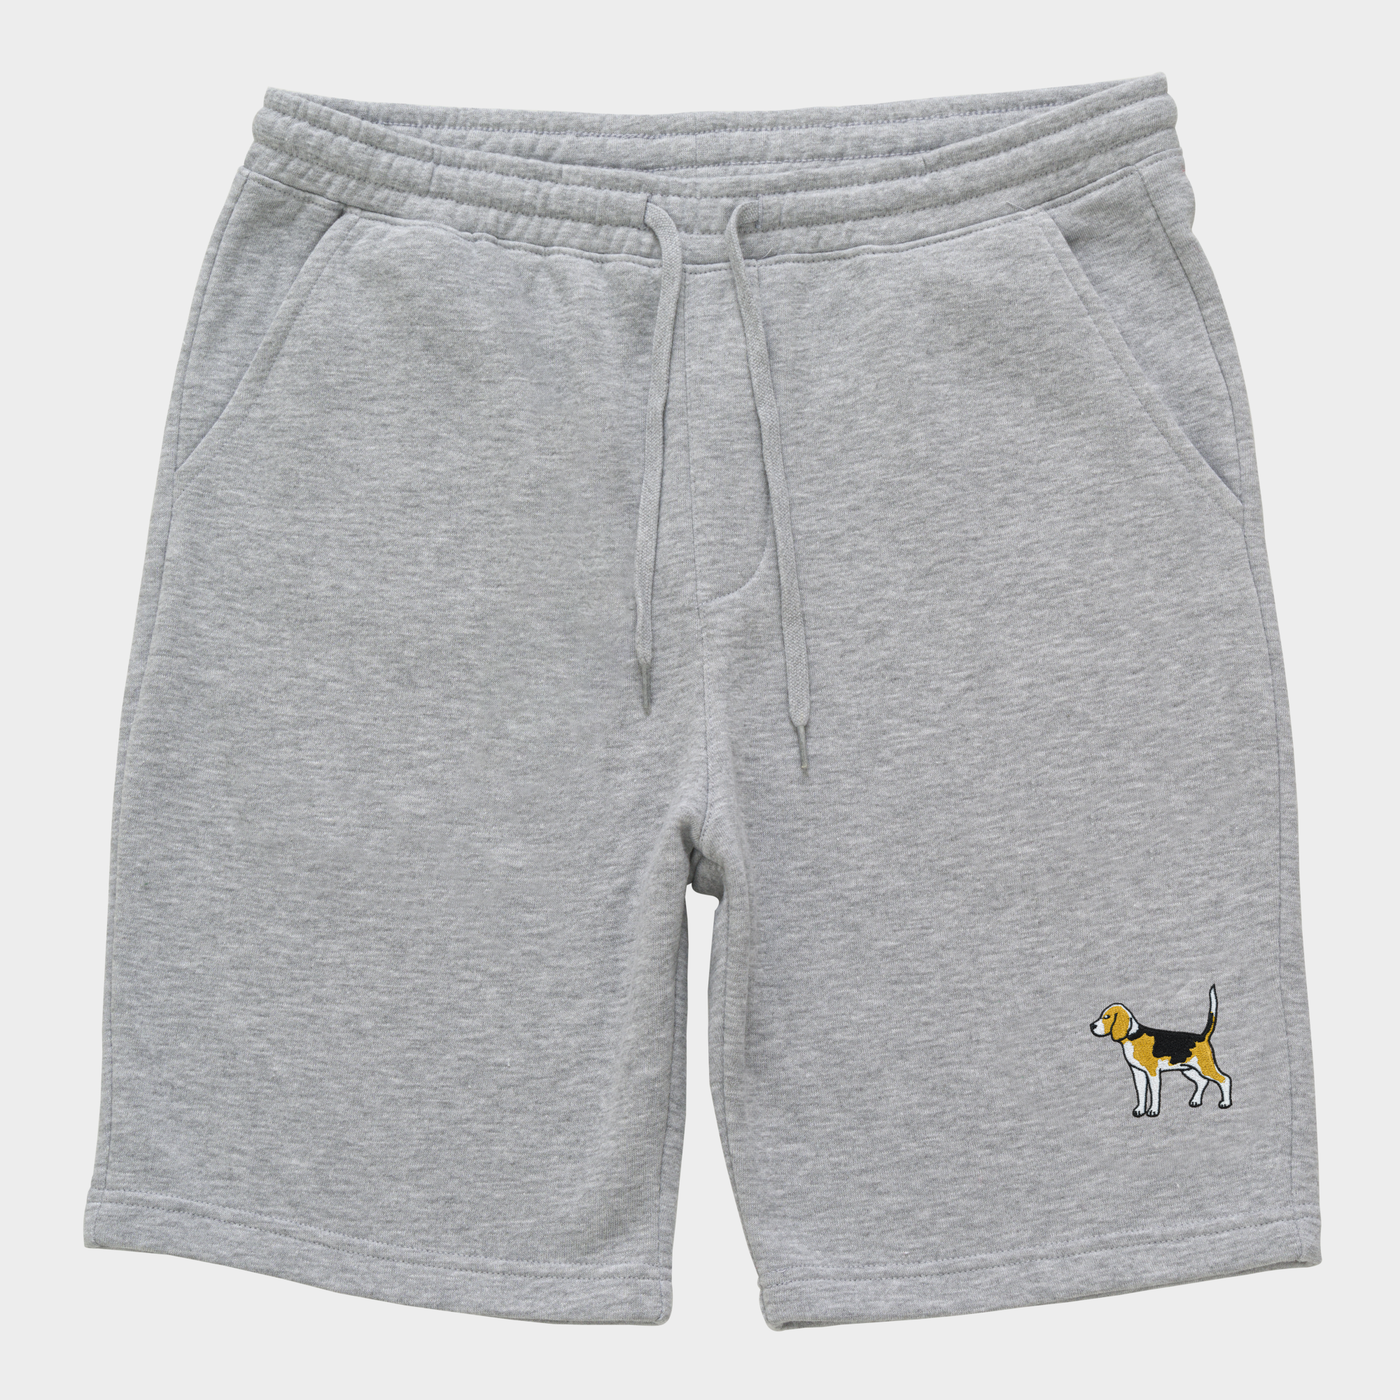 Bobby's Planet Men's Embroidered Beagle Shorts from Paws Dog Cat Animals Collection in Heather Grey Color#color_heather-grey